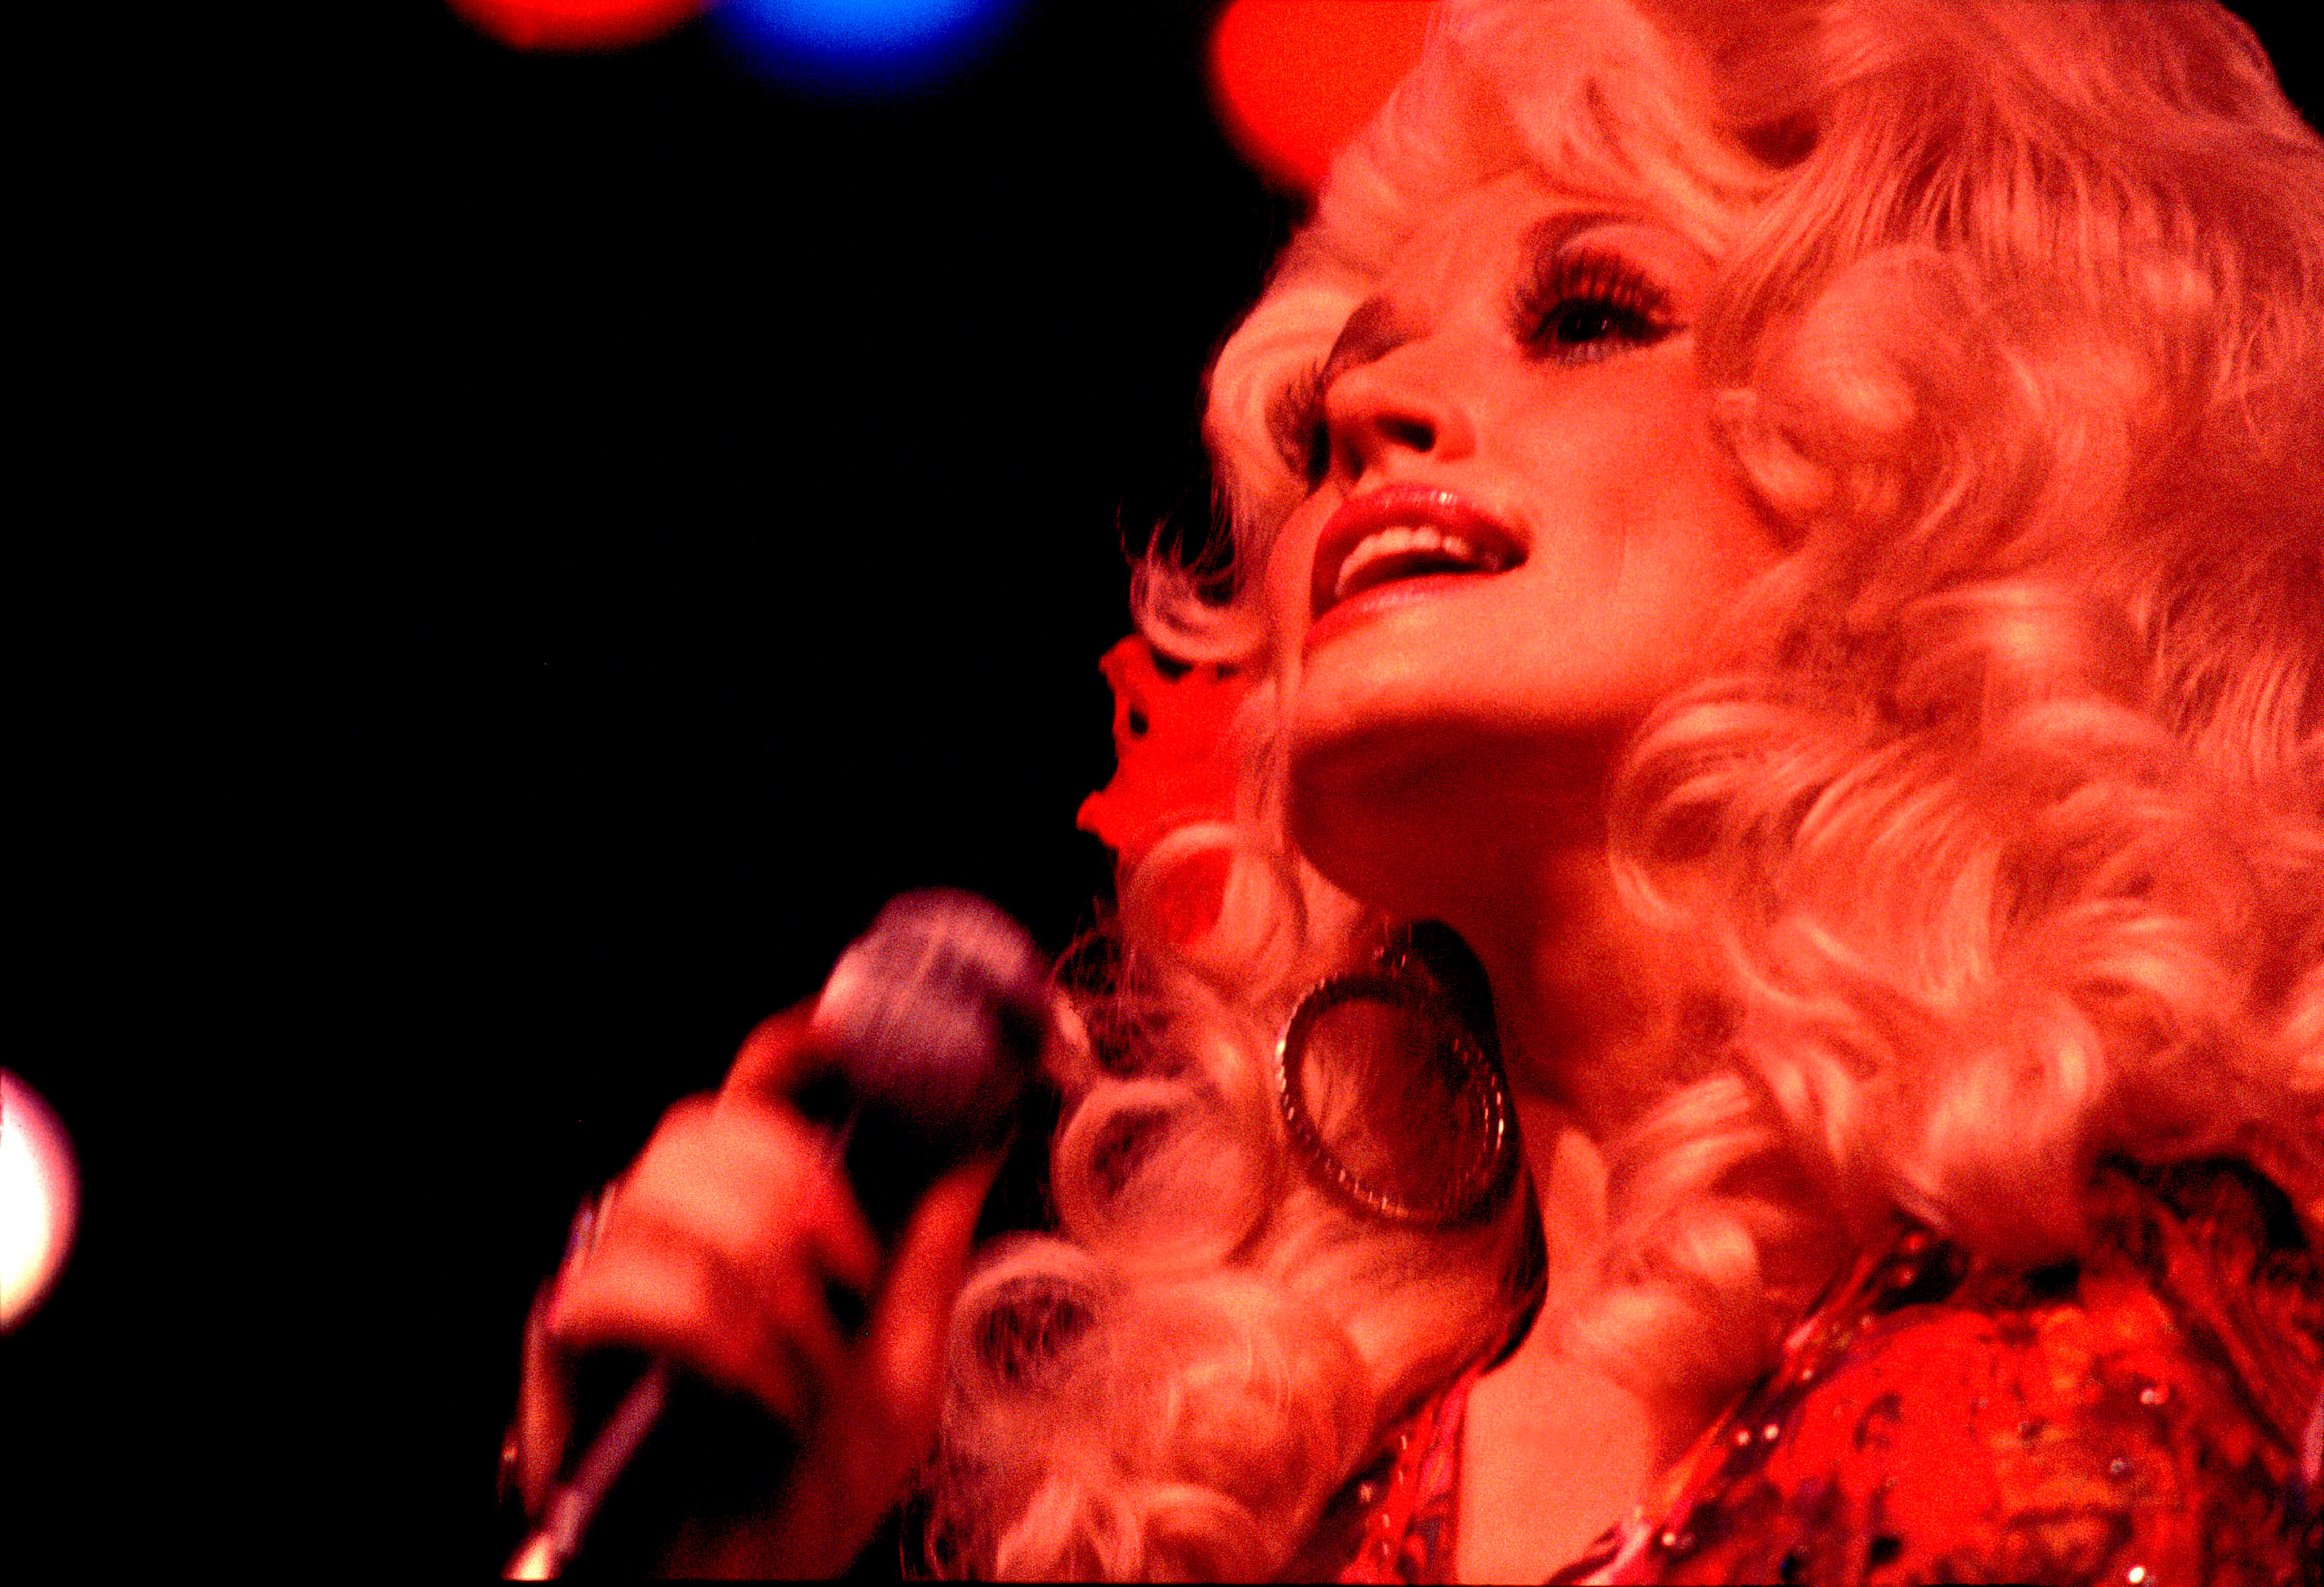 Dolly Parton singing onstage in red light.